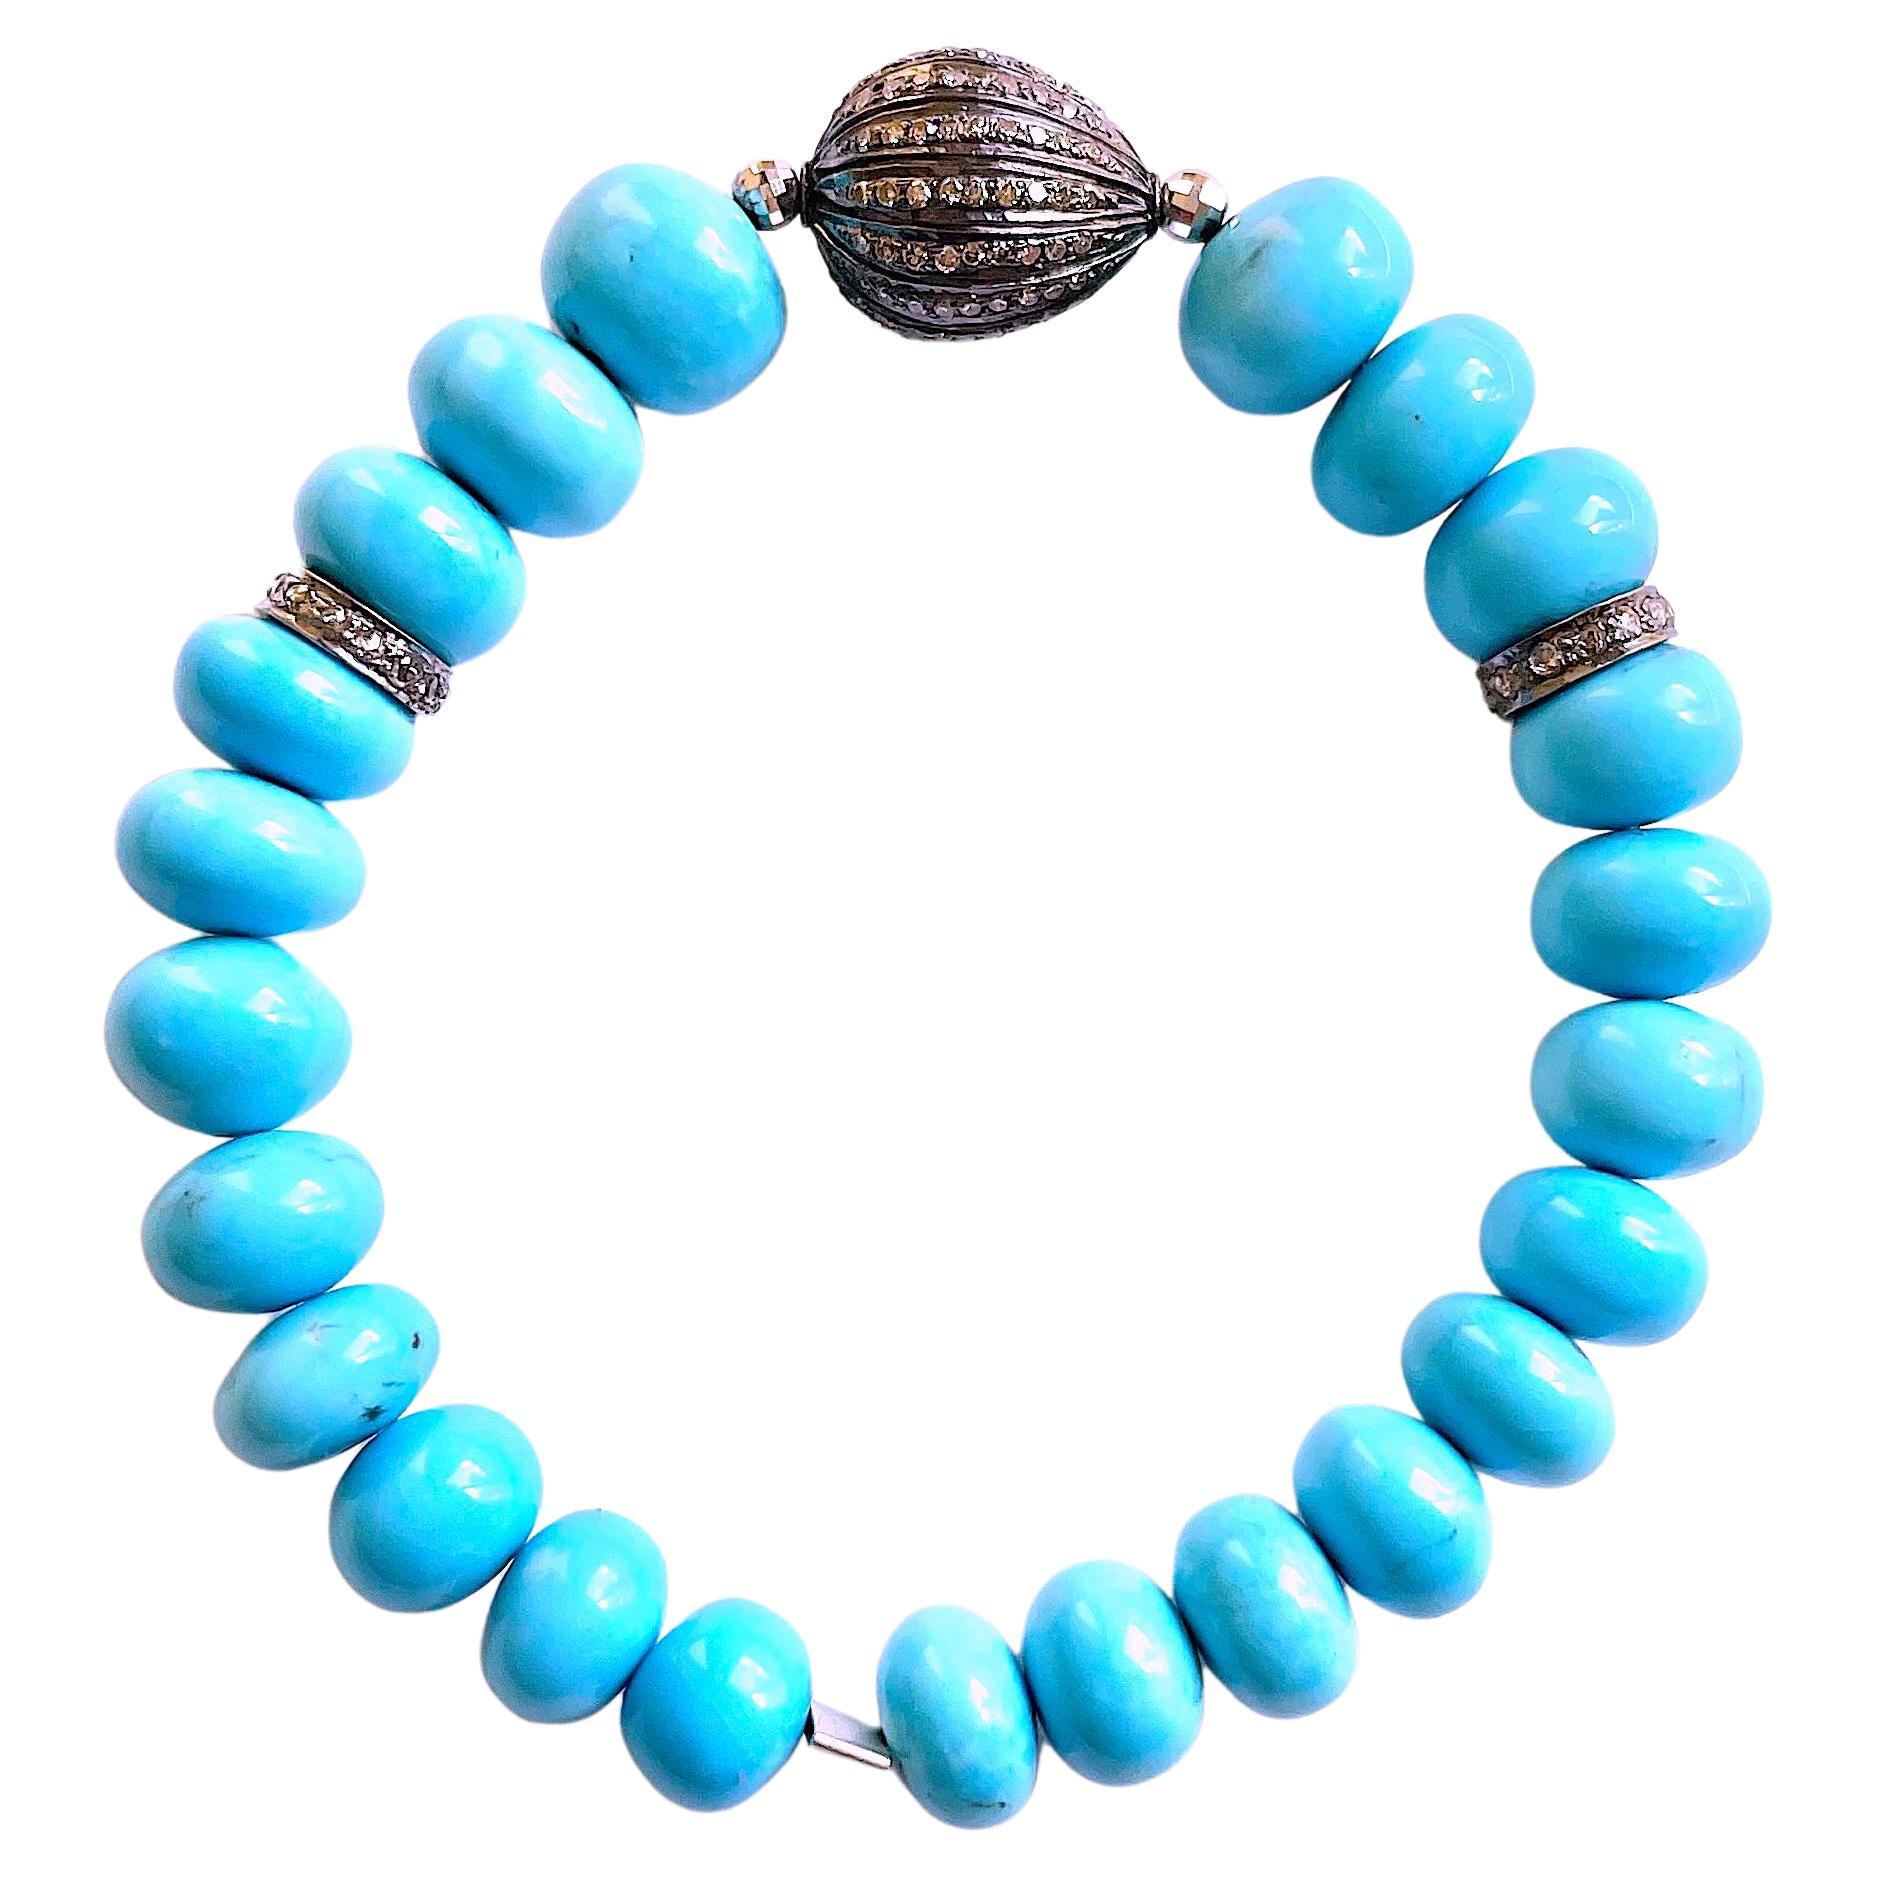 Description
Sleeping Beauty turquoise, pave diamonds, with 14k white gold faceted balls stretchy bracelet.
Item # B1262

Materials and Weight
Sleeping Beauty Turquoise 52 carats, 8 to 10mm, round beads.
Rhodium sterling silver 12mm ball, and